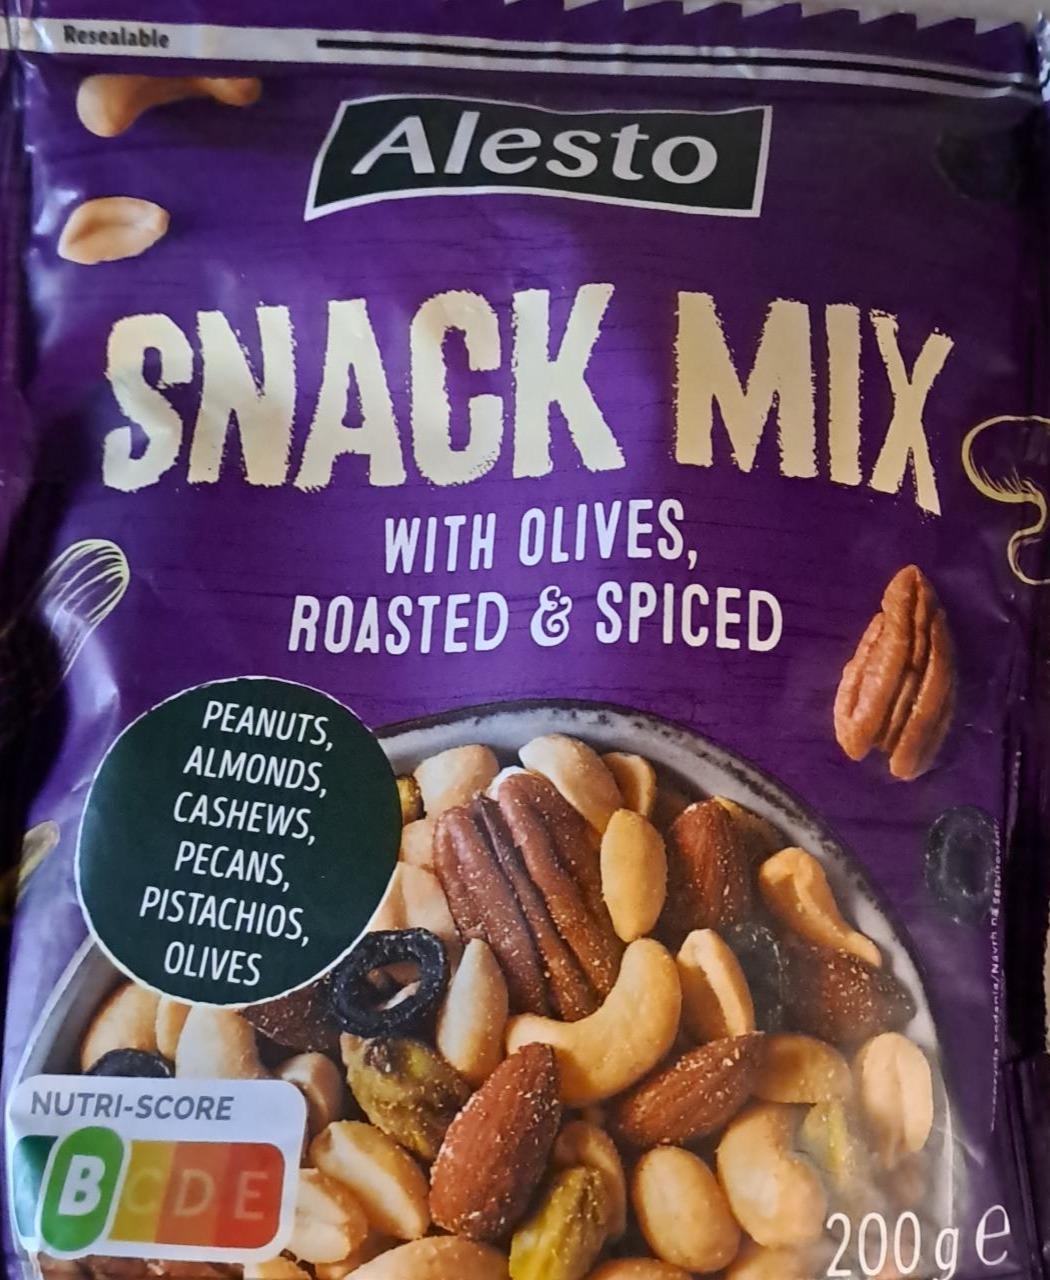 Фото - Snack mix with olives, roasted & spices Alesto